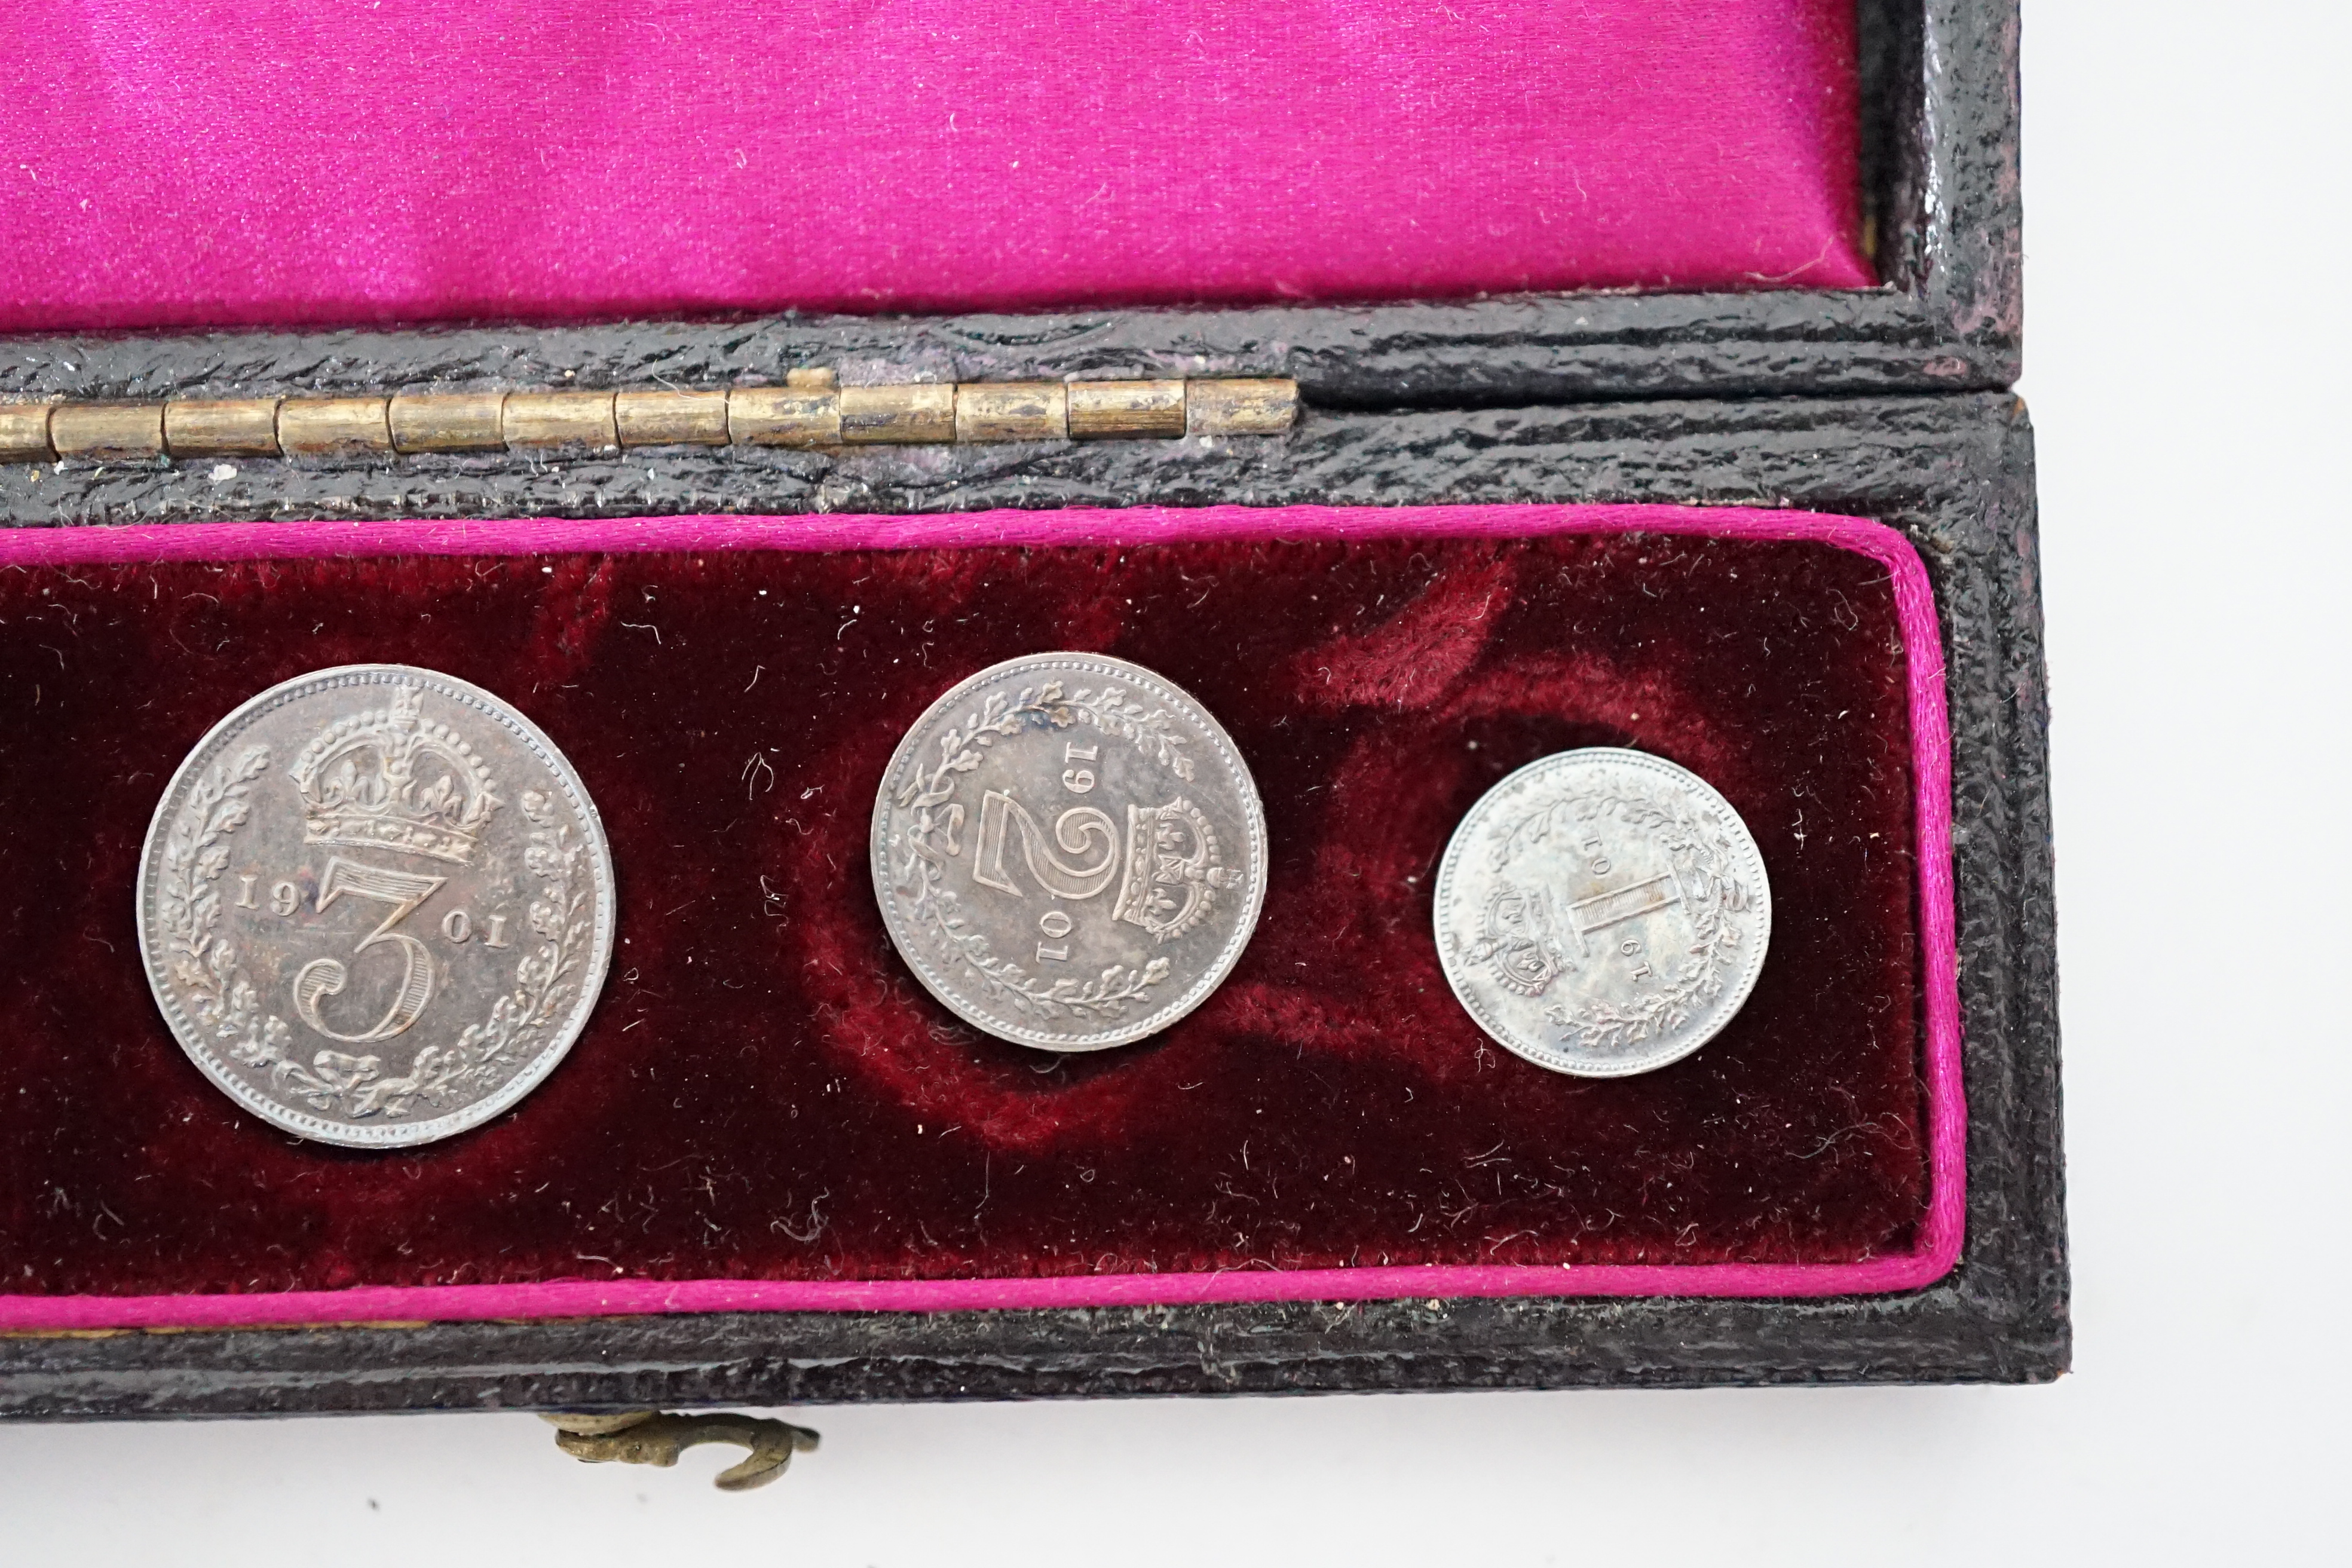 British silver coins, Victoria Maundy coin set, 1d - 4d, 1901, UNC, cased, 1895 crown, good fine, 1889 double florin, 1887 halfcrown, George IV shilling 1826, George V Crown, 1928, good VF, toned, and other various coins